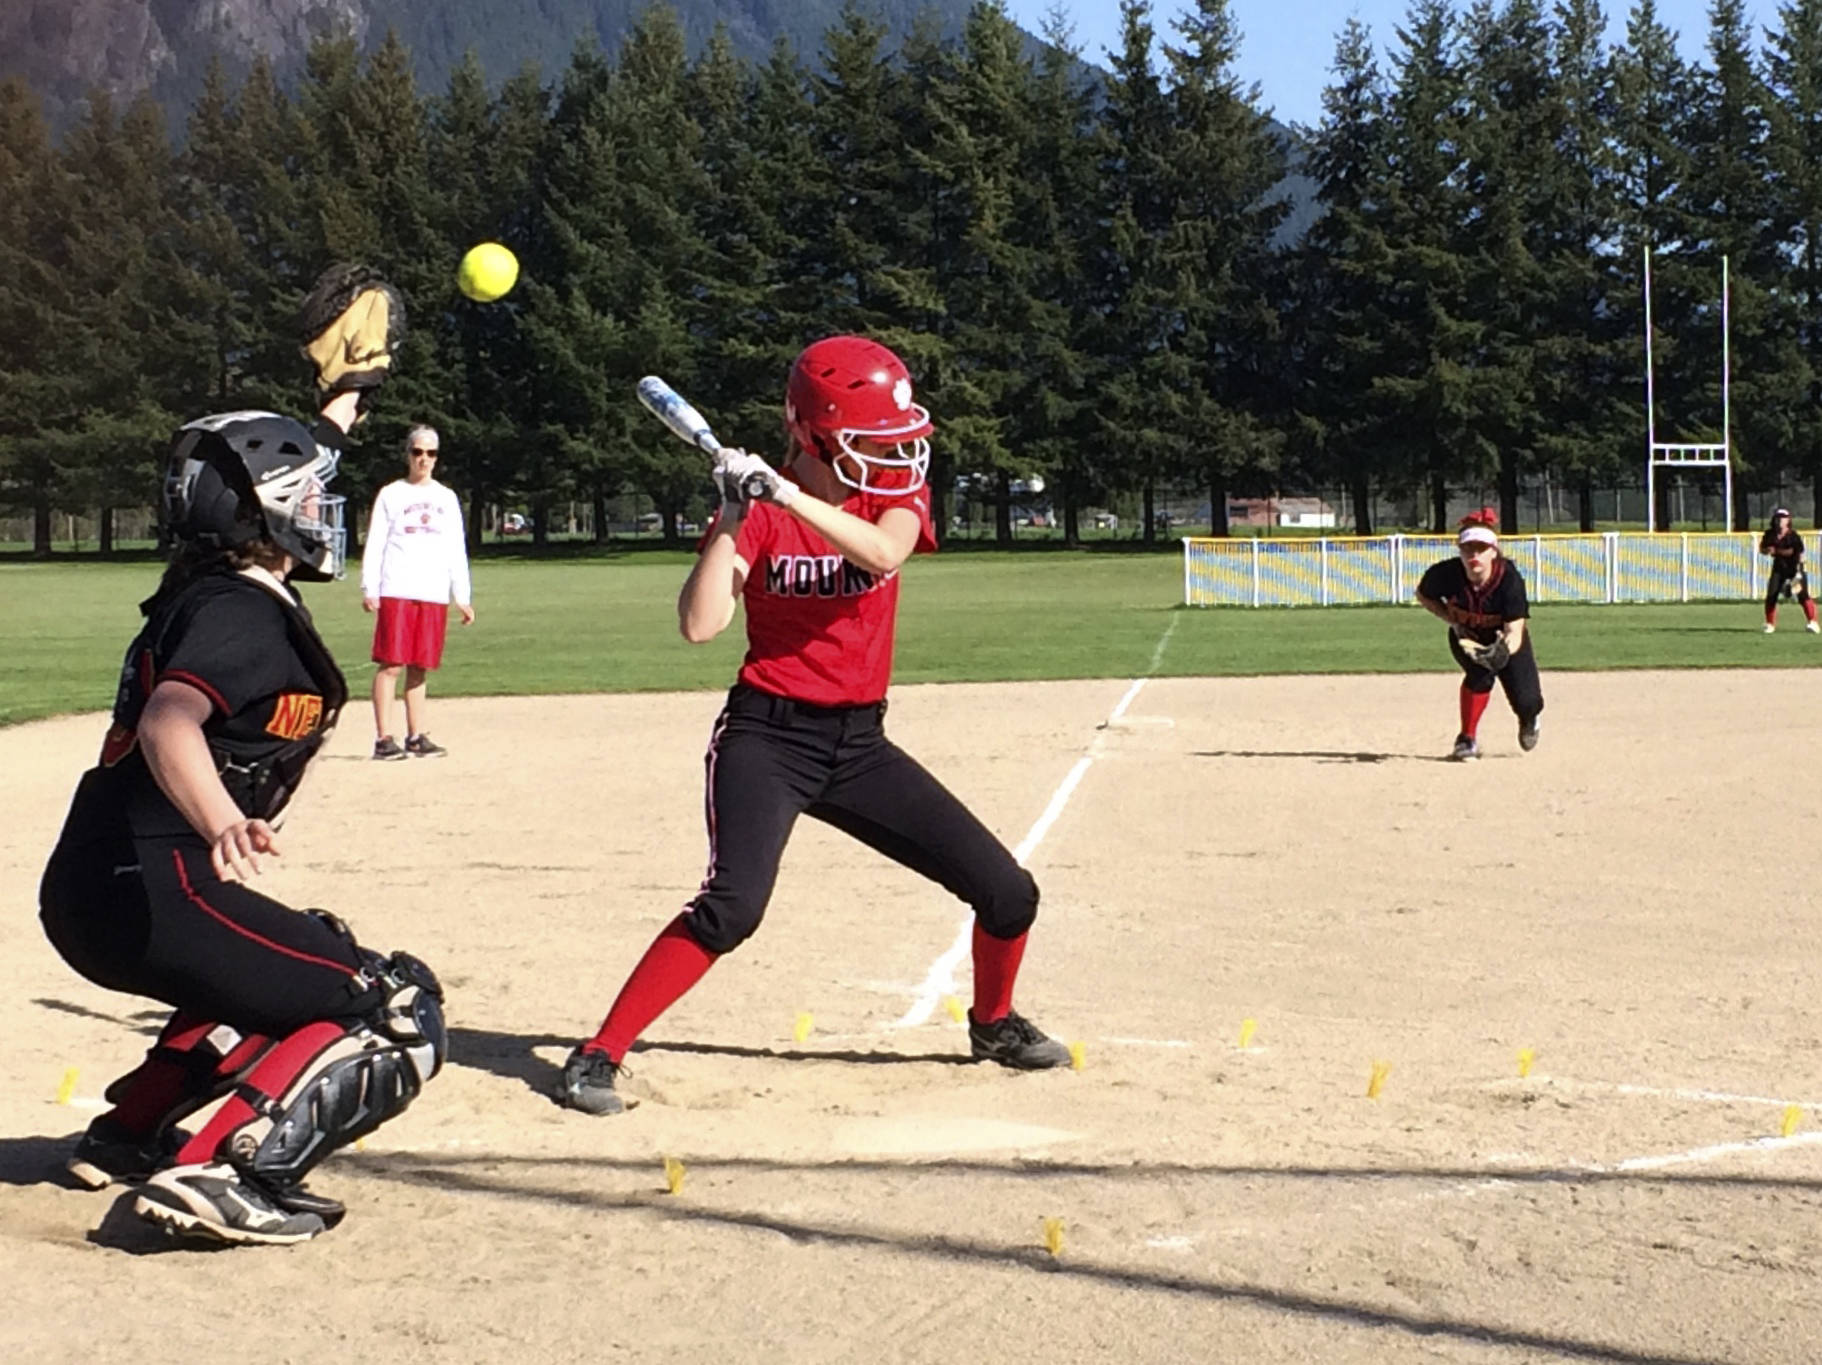 Shaun Scott, staff photo                                Mount Si player Samantha Simmons (pictured) went 3-for-3 and scored three runs in a contest against the Newport Knights on April 25 in Snoqualmie. Newport defeated Mount Si, 10-7.